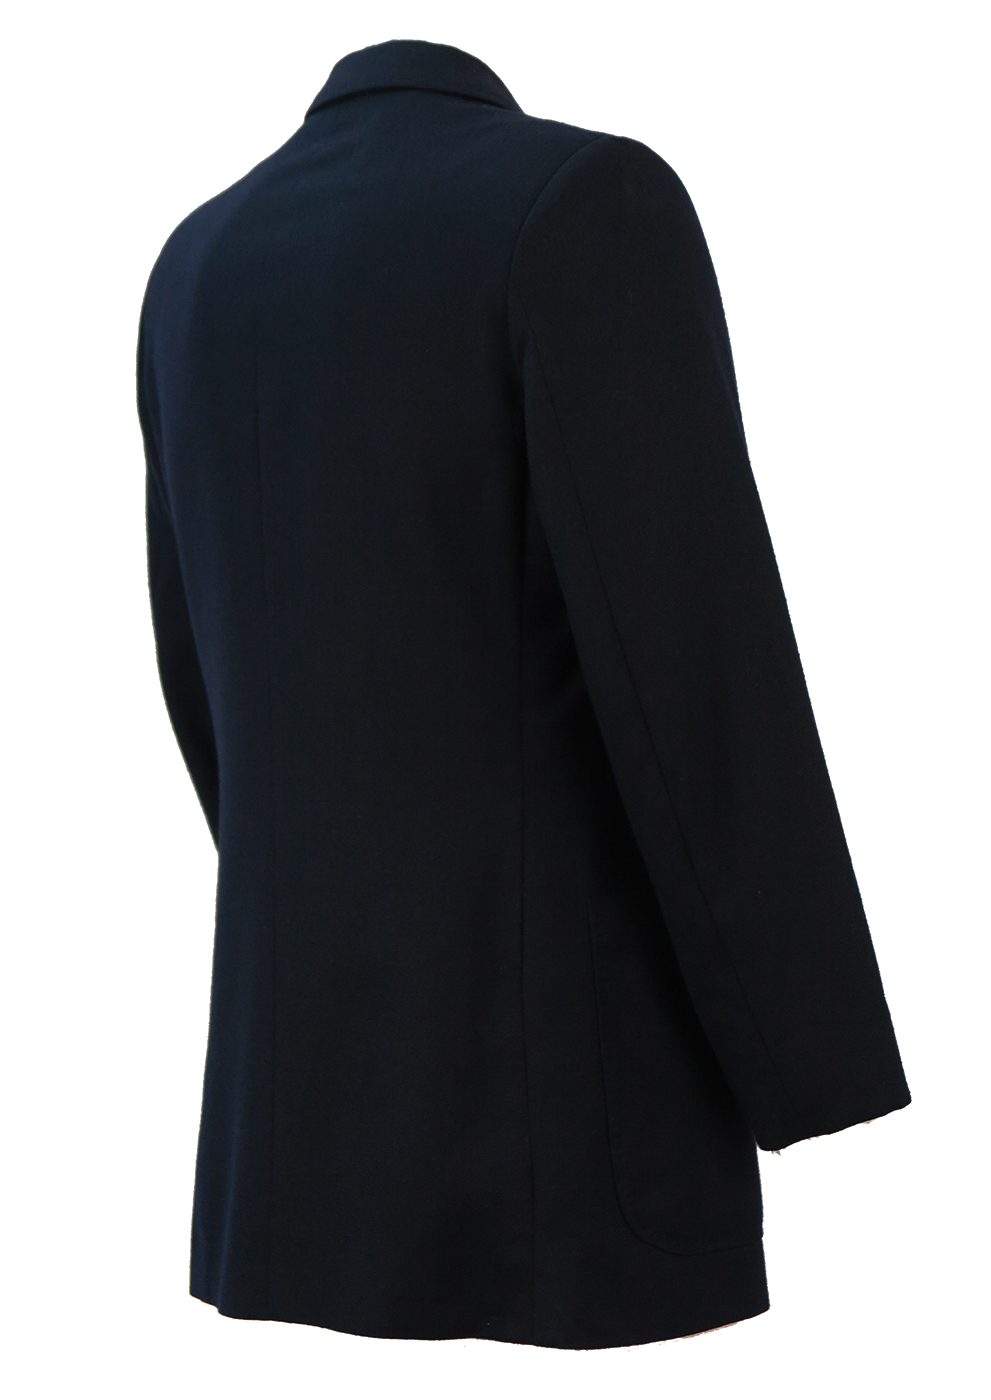 Navy Blue Pure Wool Double Breasted Blazer with Gold Buttons - S/M ...